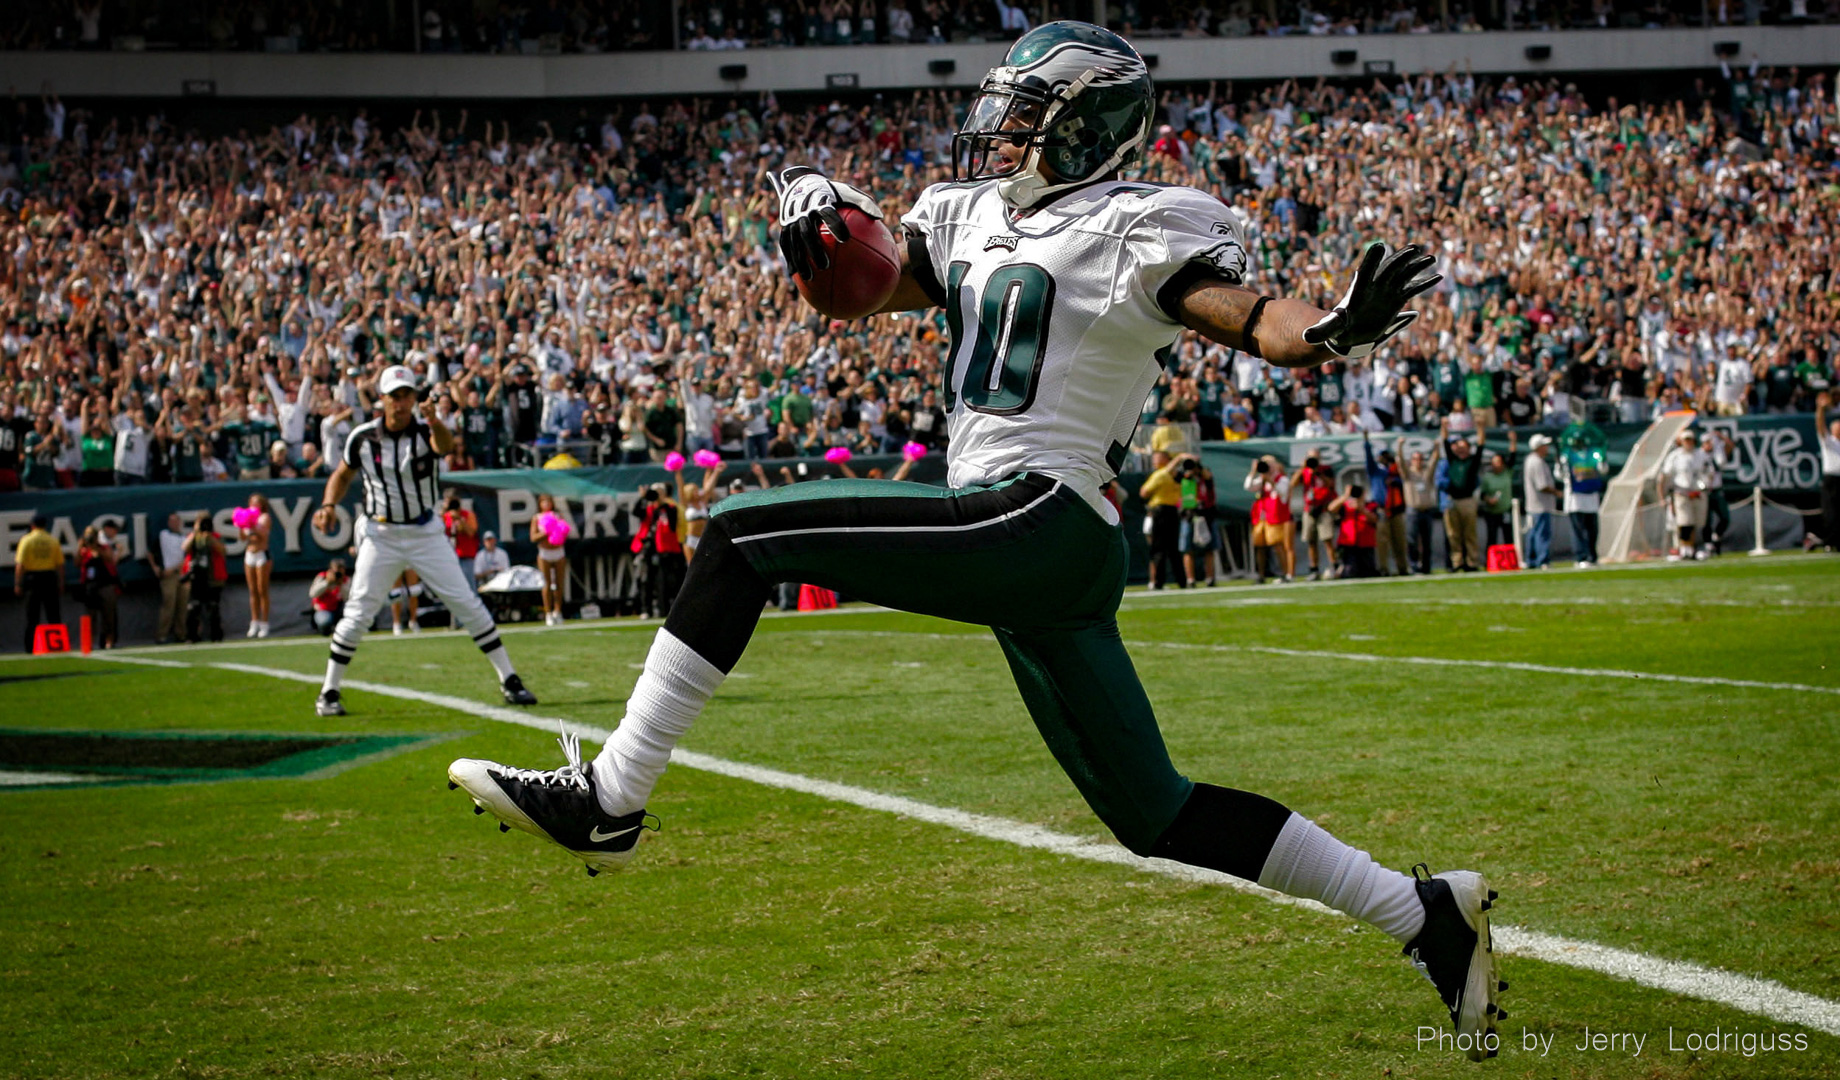 Eagles DeSean Jackson high steps into the end zone as he returns a punt 68 yards for a touchdown against the Redskins on October 5, 2008 in Philadelphia.